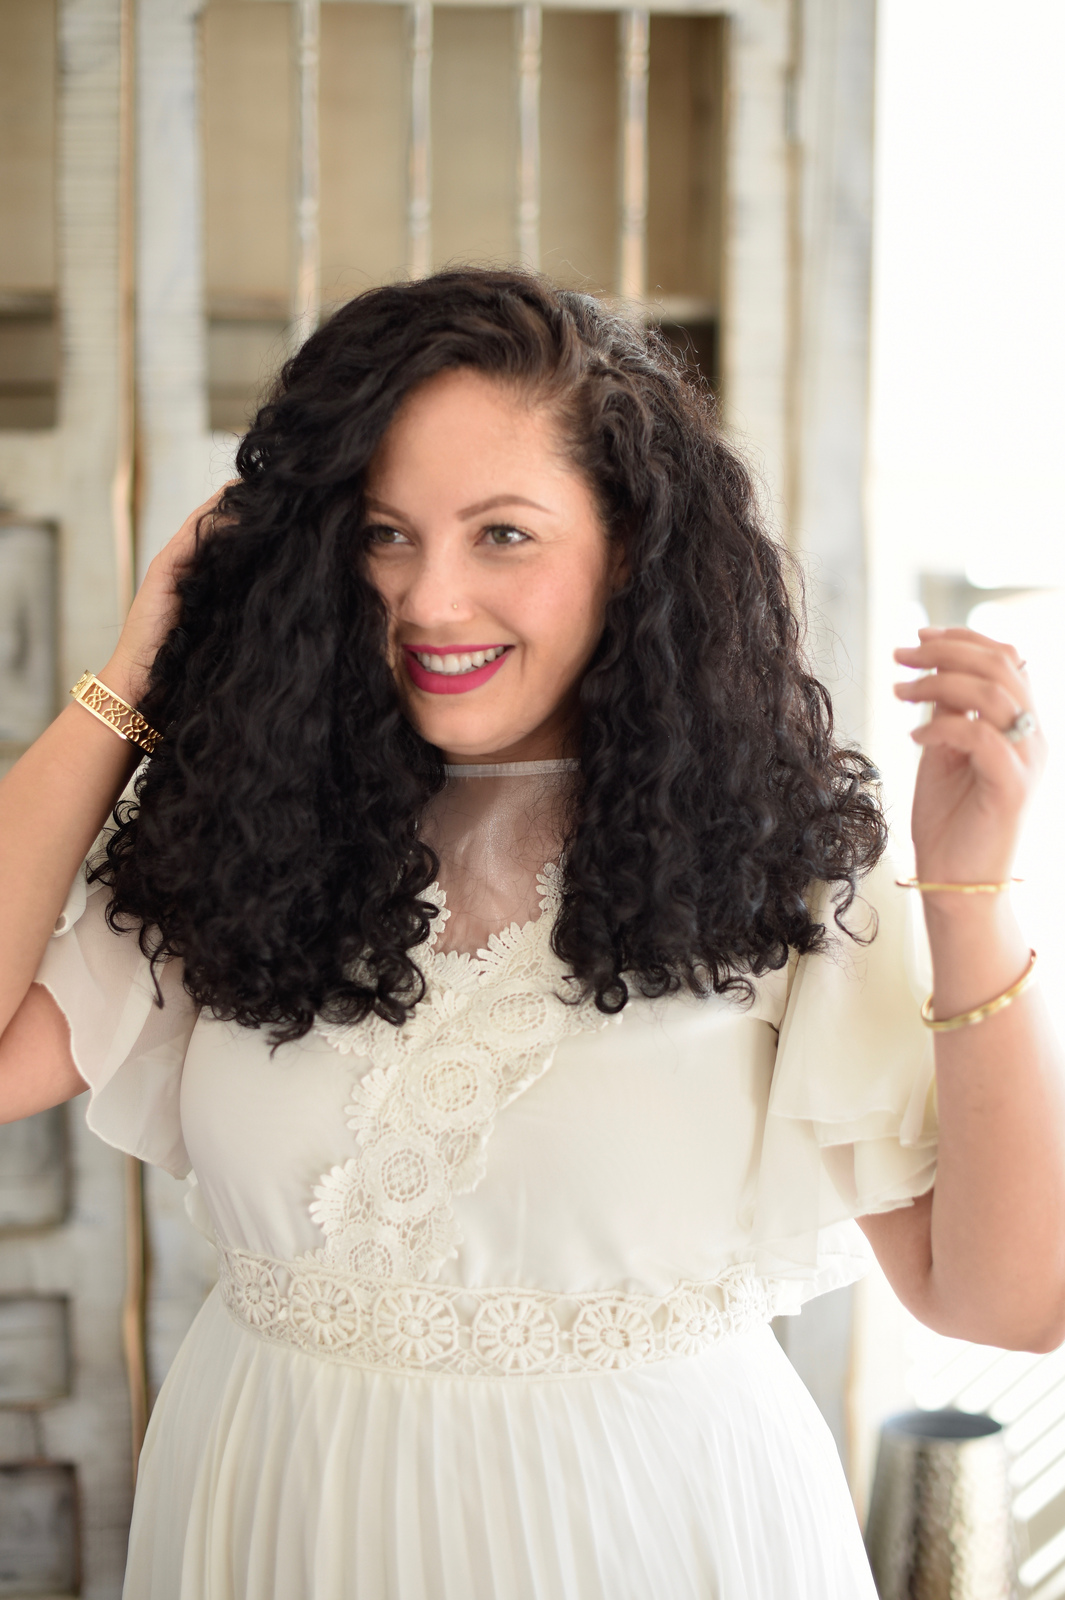 7 Tips for Healthy Hair by Girl With Curves